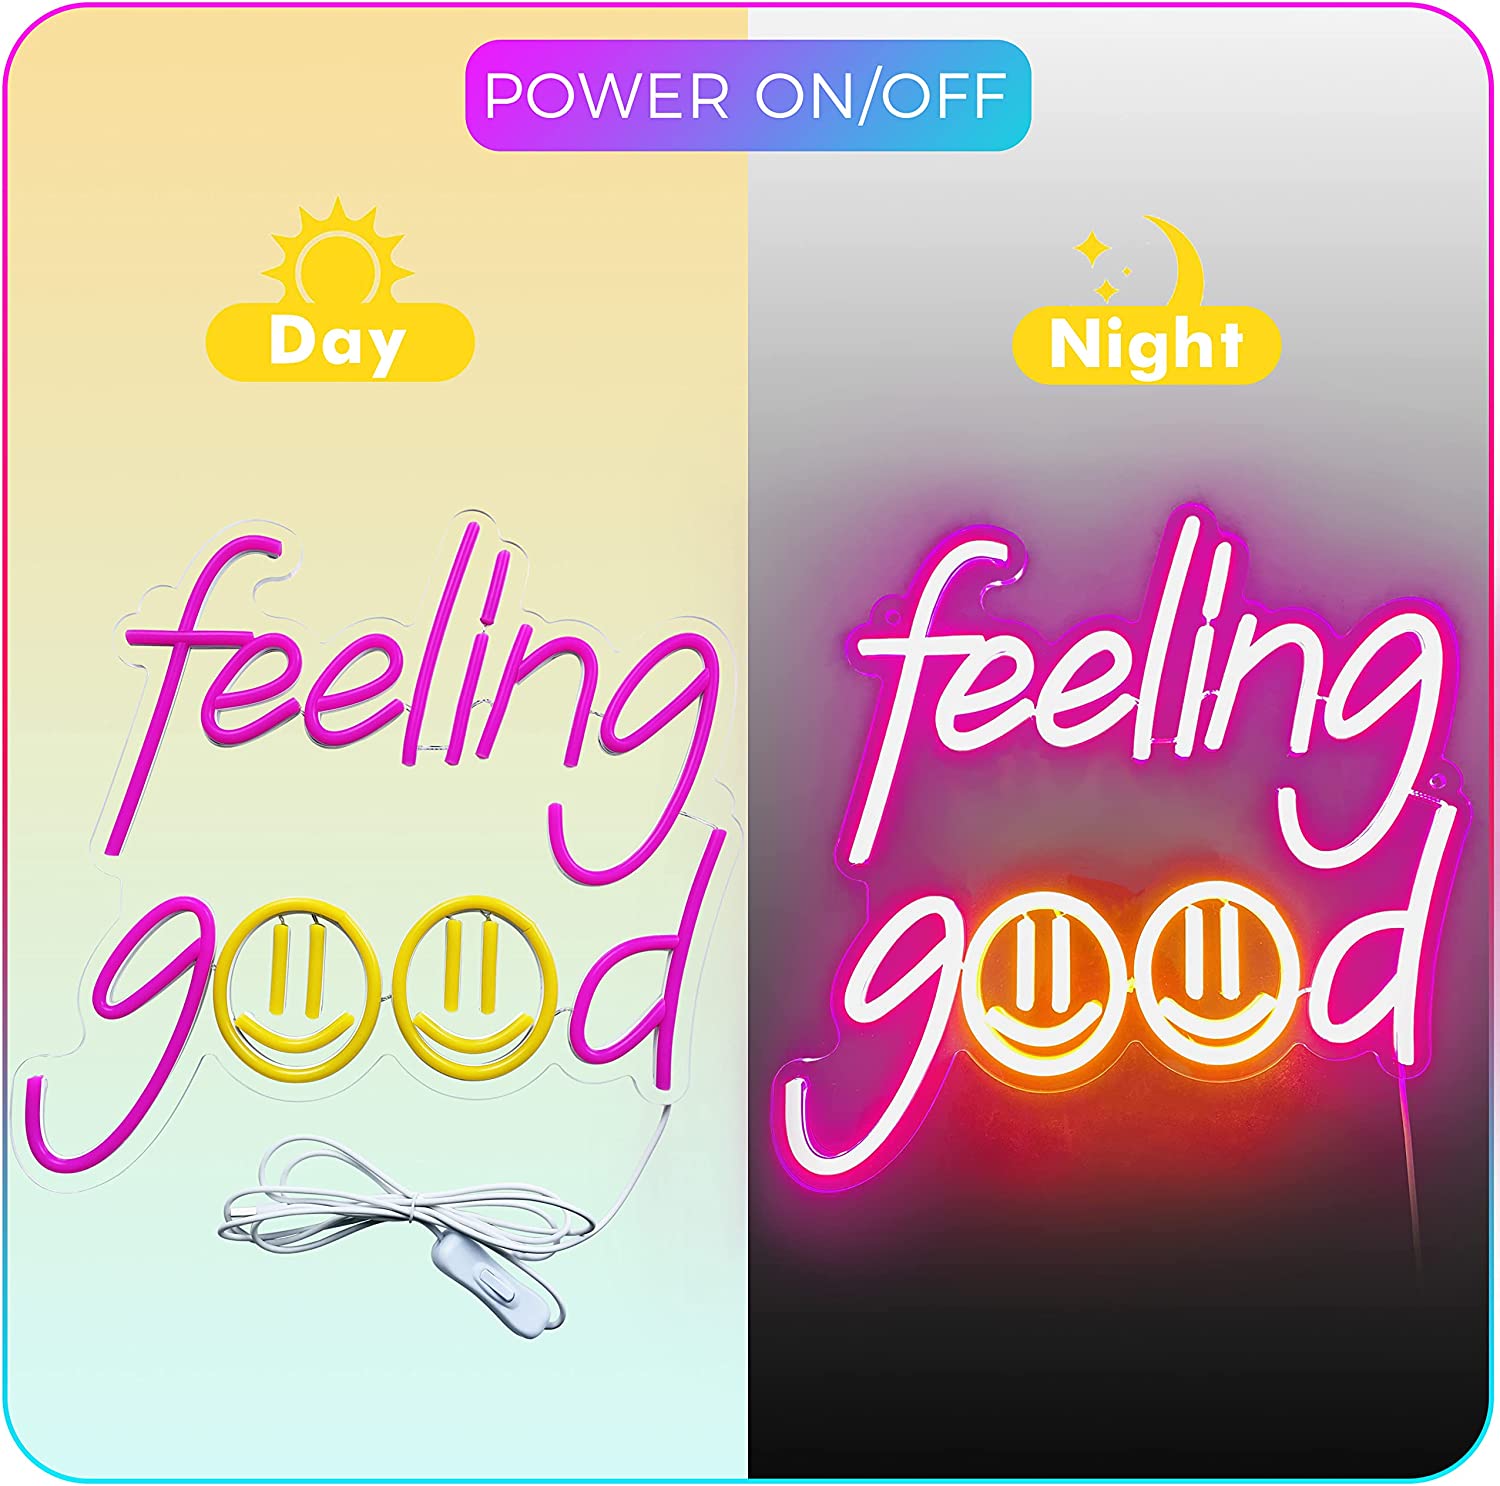 NEONIP-100% Handmade Feeling Good with Smiley Face LED Neon Sign